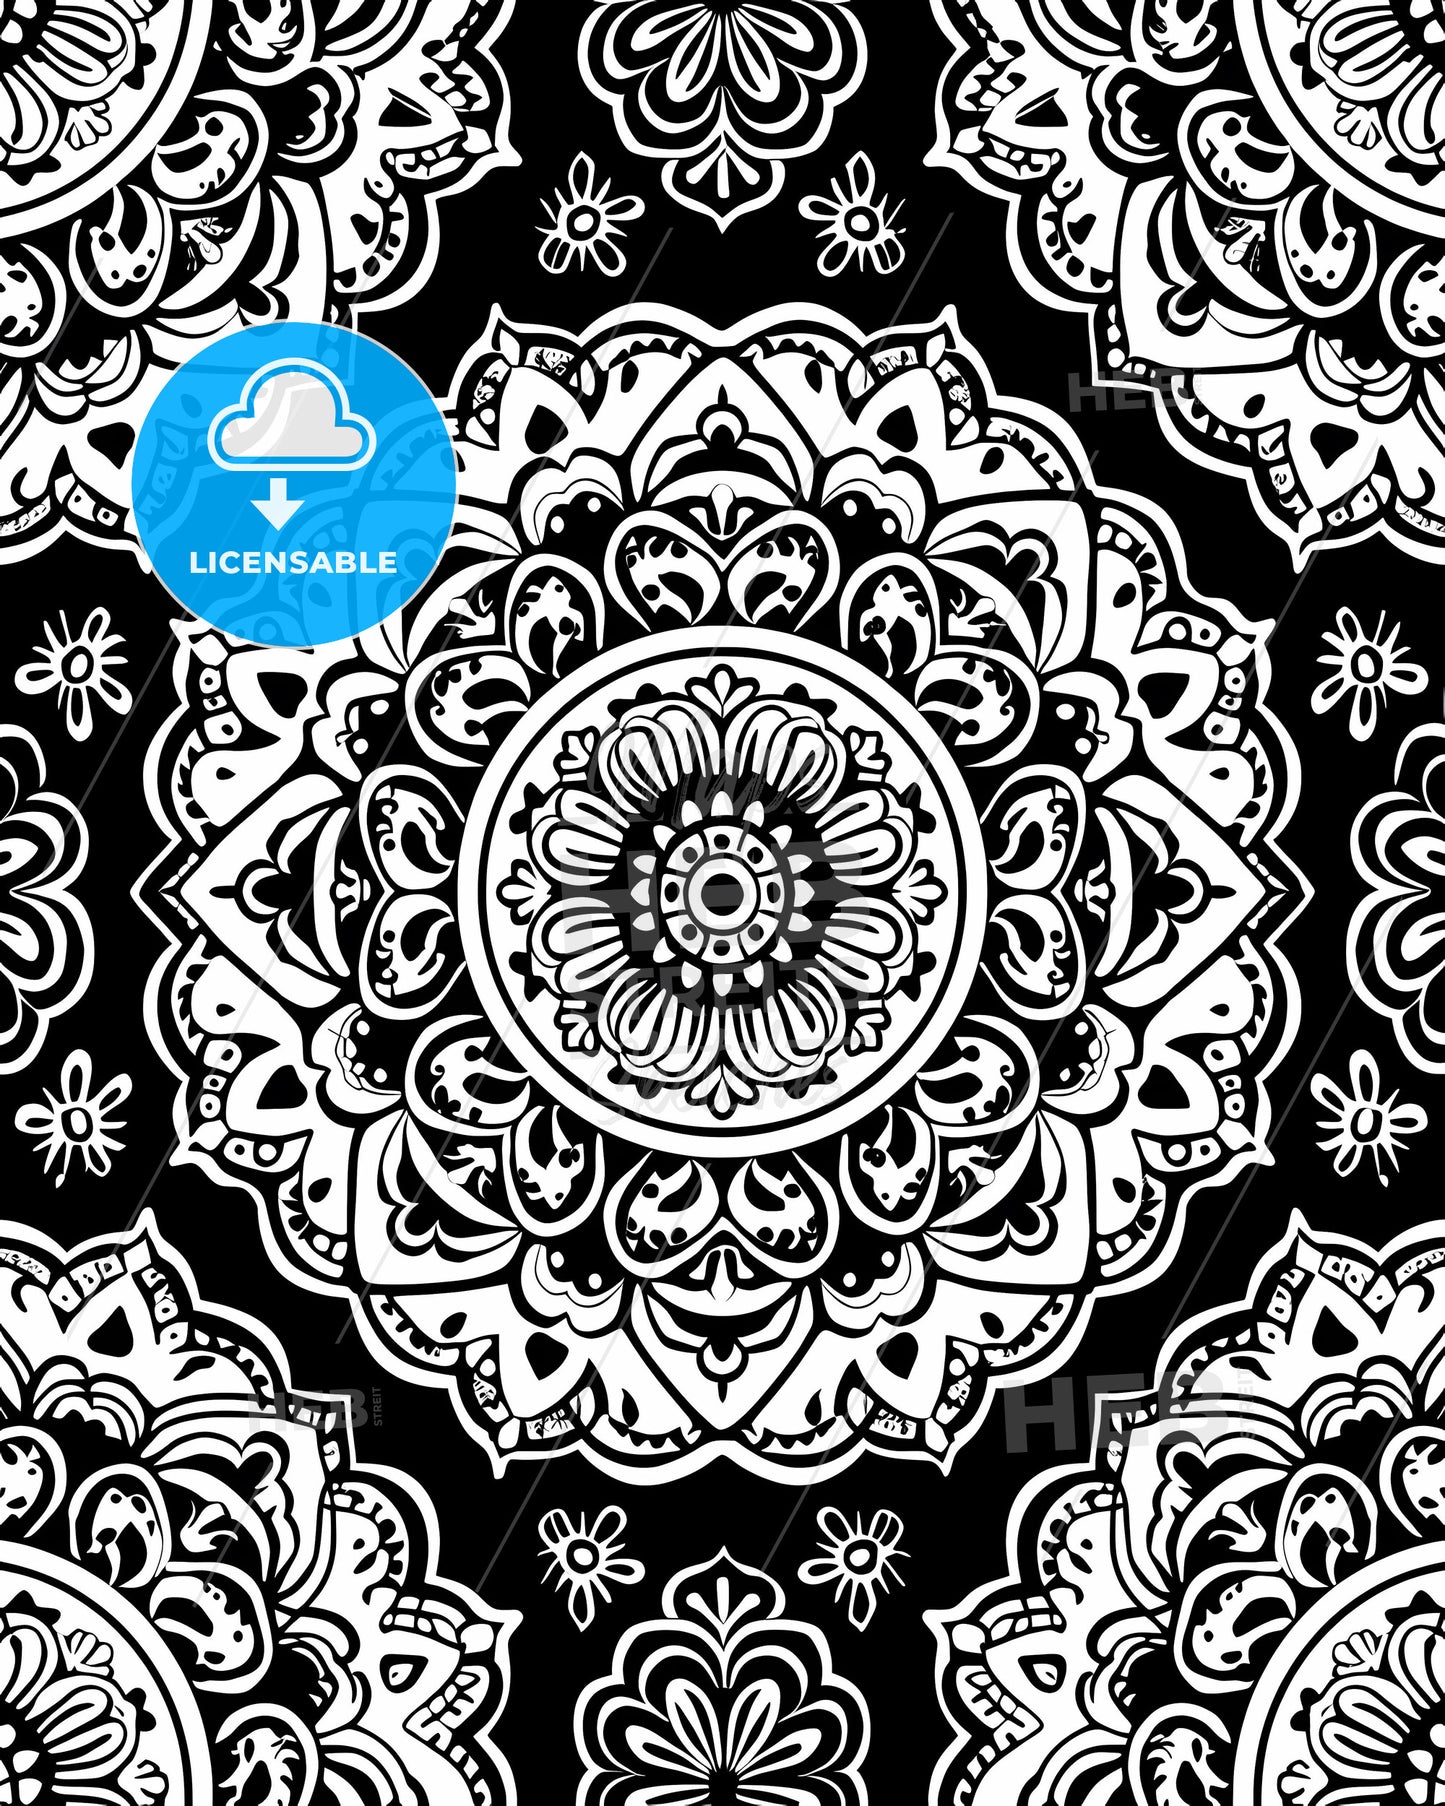 Black and White Mandala Pattern: Art Painting Focus, Vibrant Details, Artistic Abstract Design